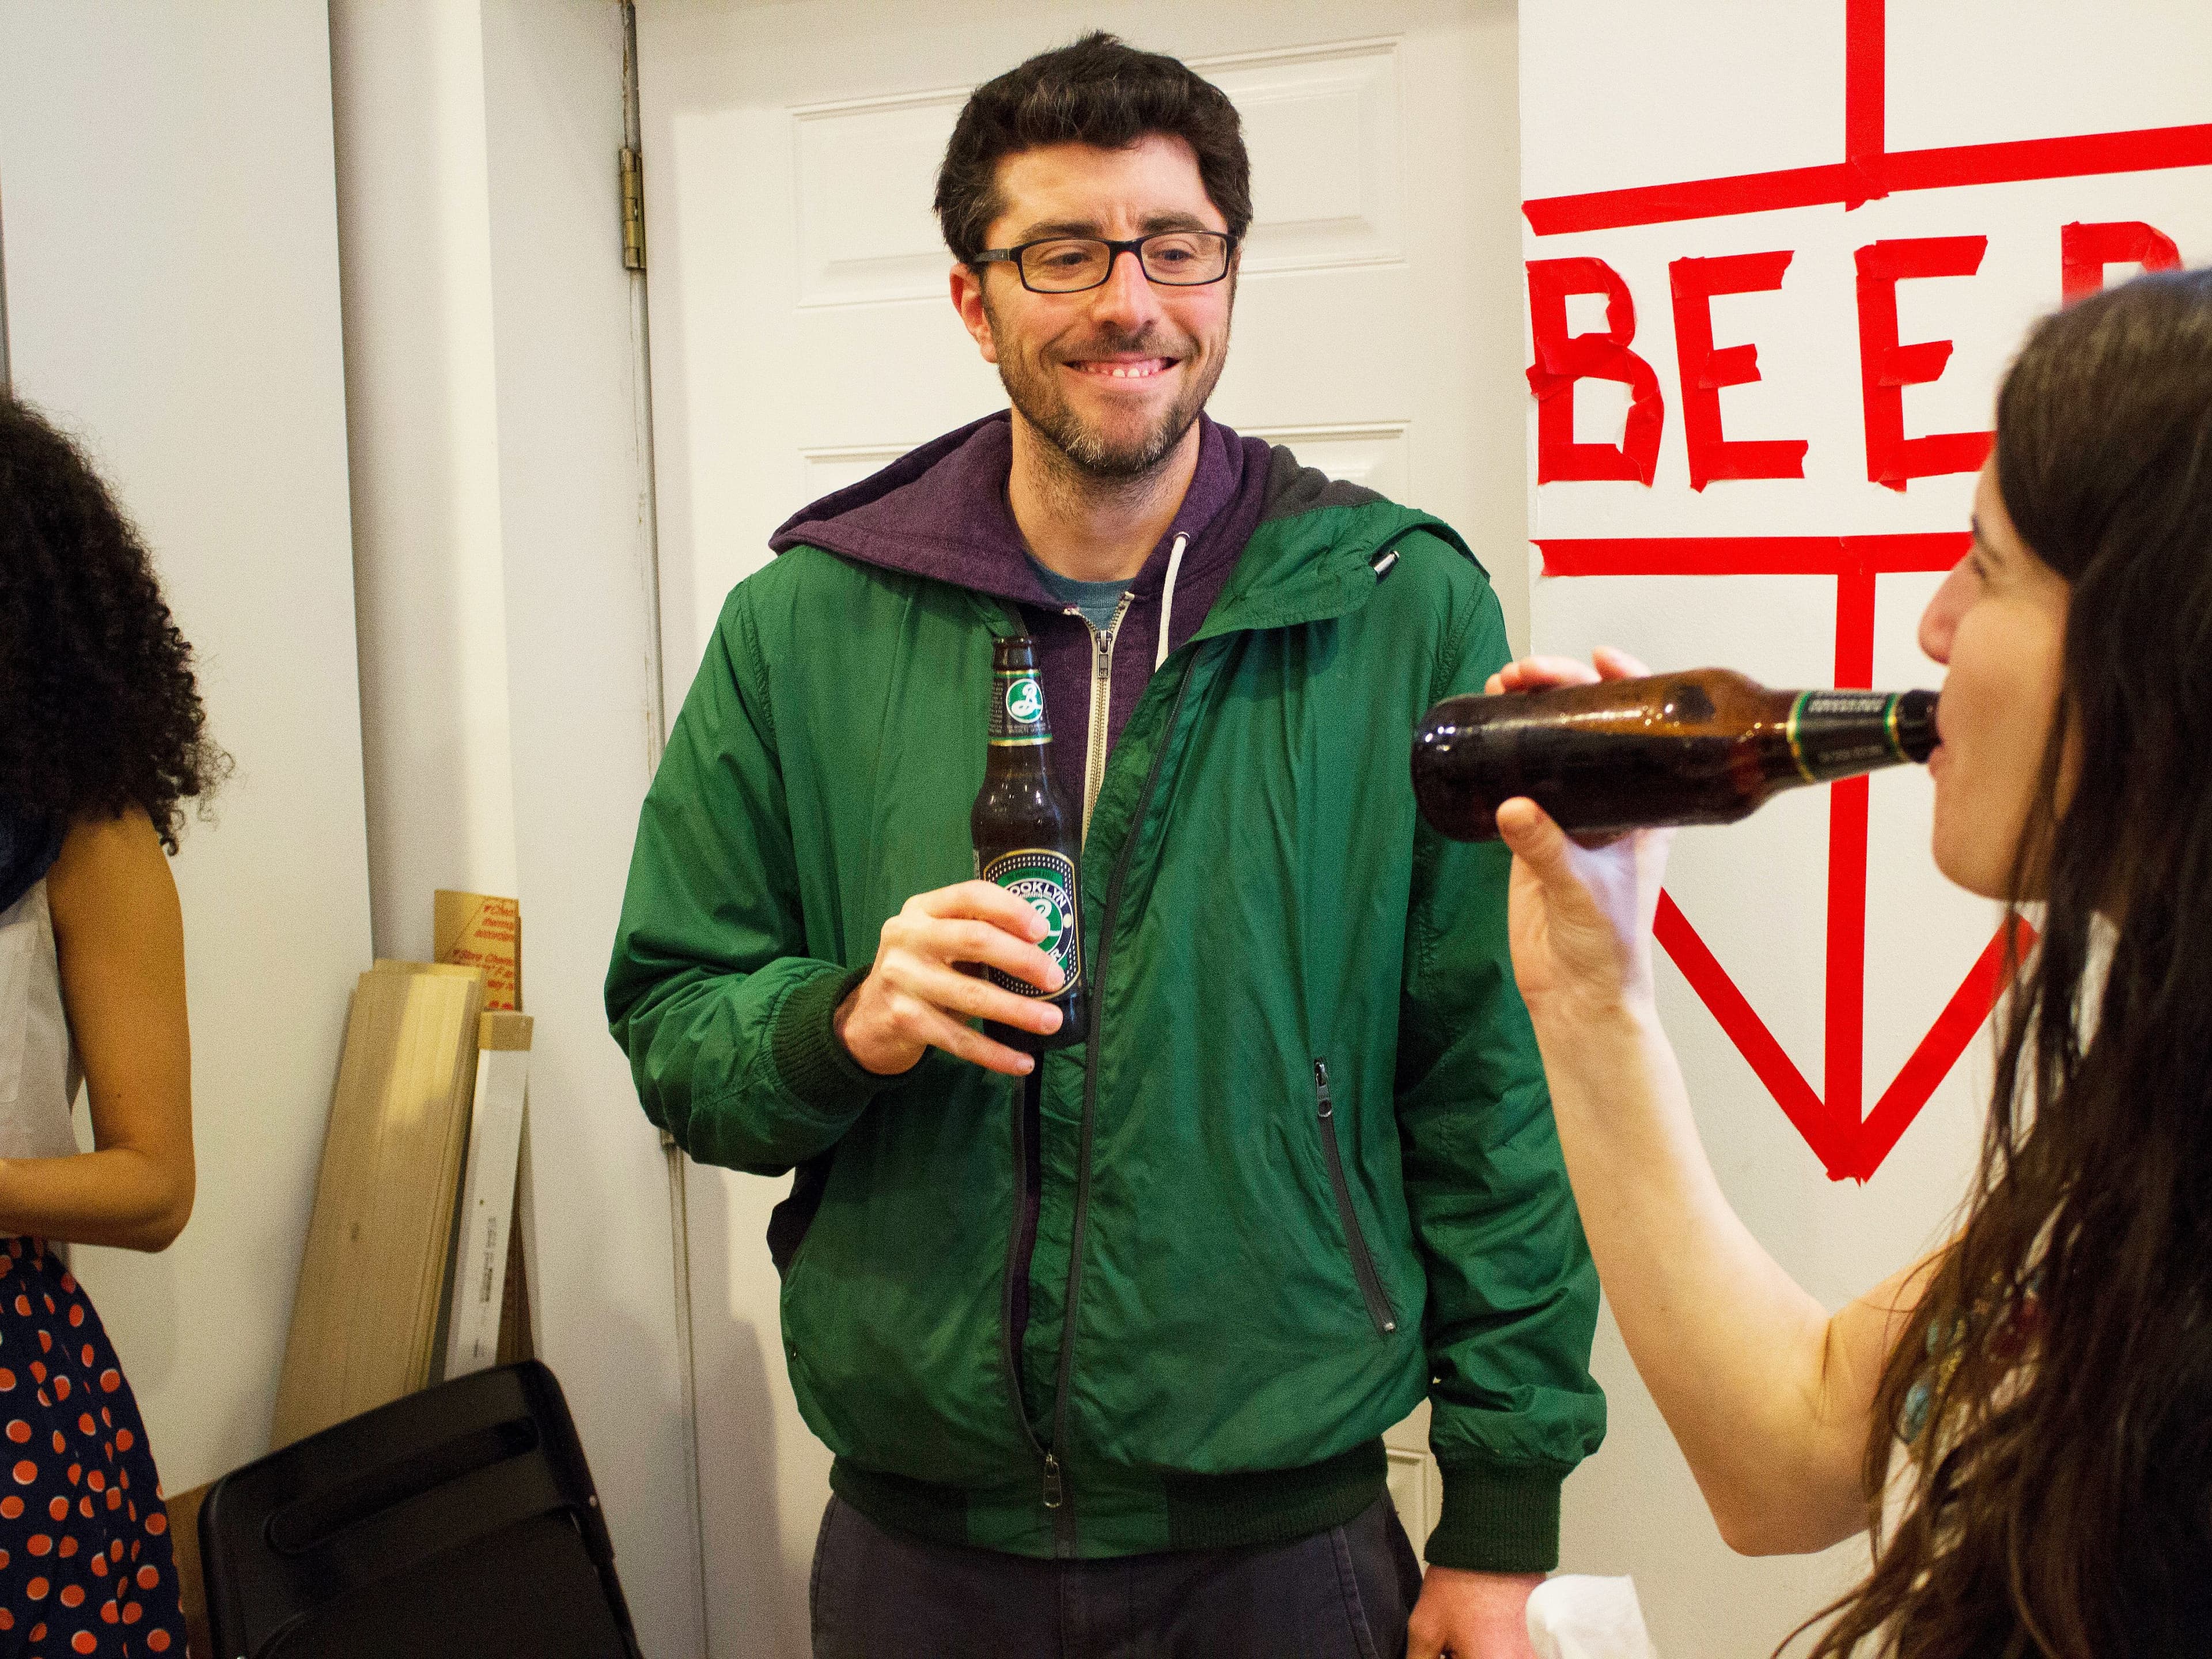 A man in a green jacket and glasses holds a bottle of beer and smiles while looking towards a woman drinking beer from a bottle. The woman has long hair and wears a patterned skirt. They are standing near a white wall with a red cross marked "BEER.